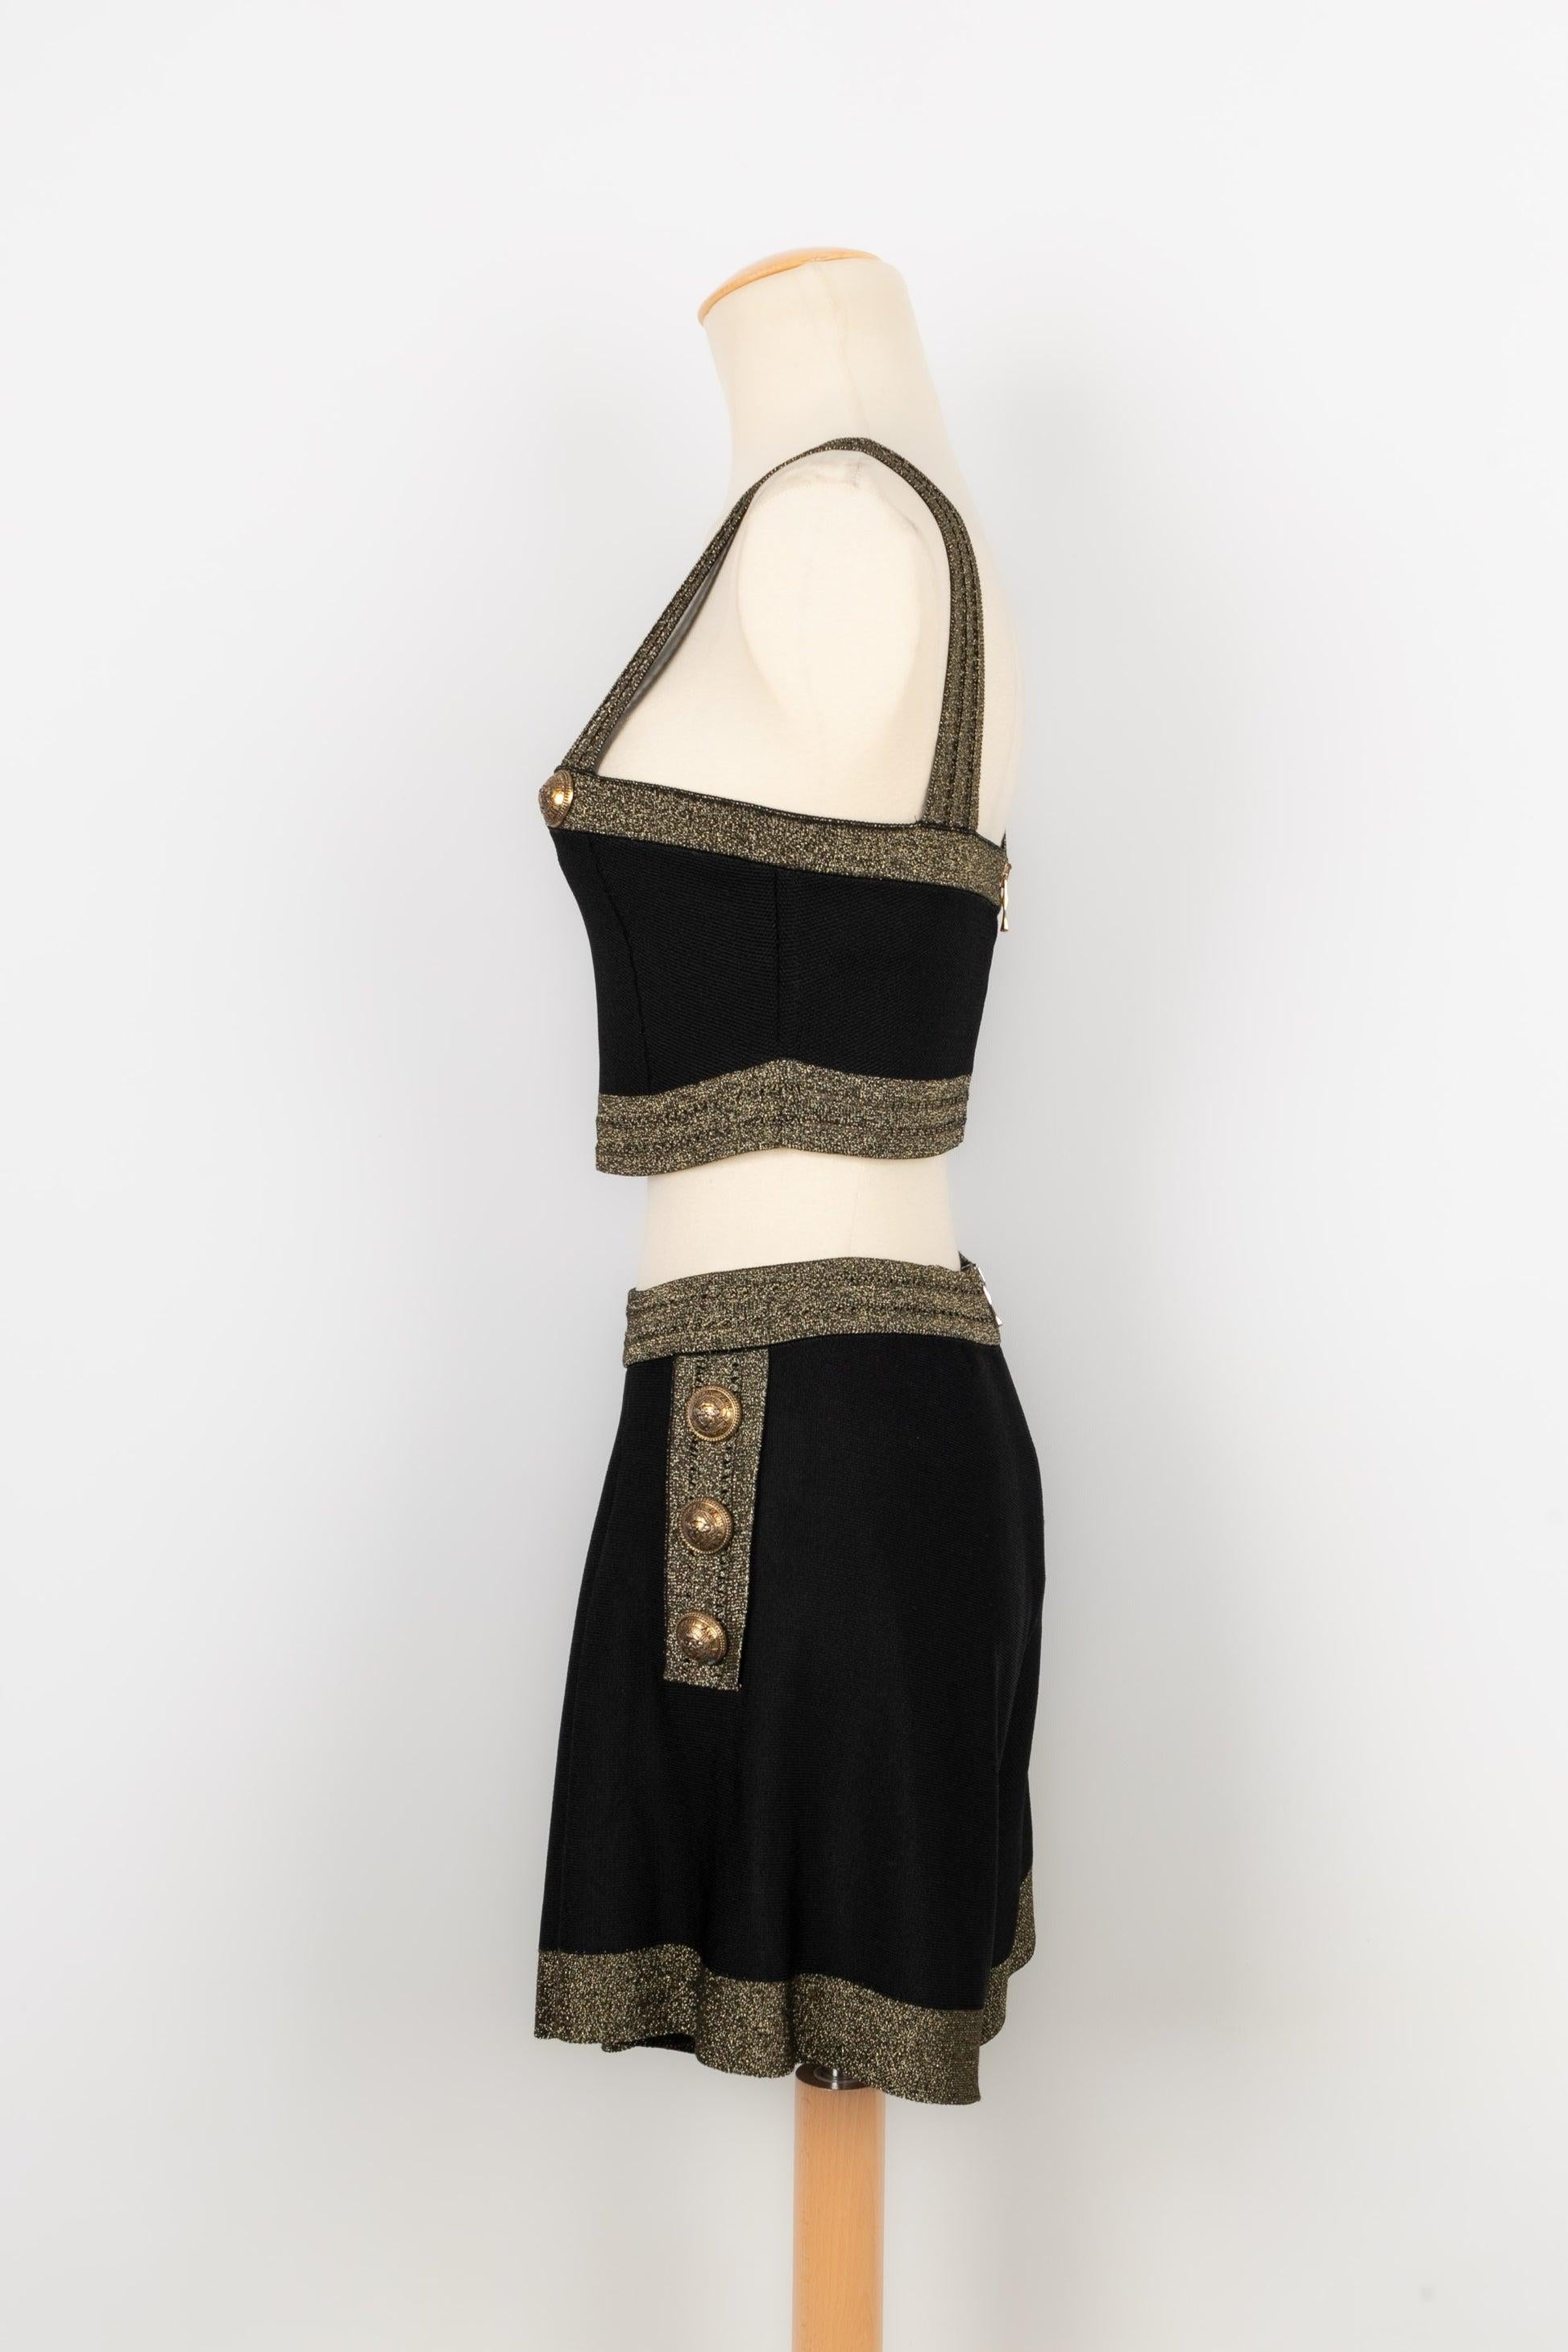 Women's Balmain Set Composed of Shorts and a Black Top Edged with Golden For Sale